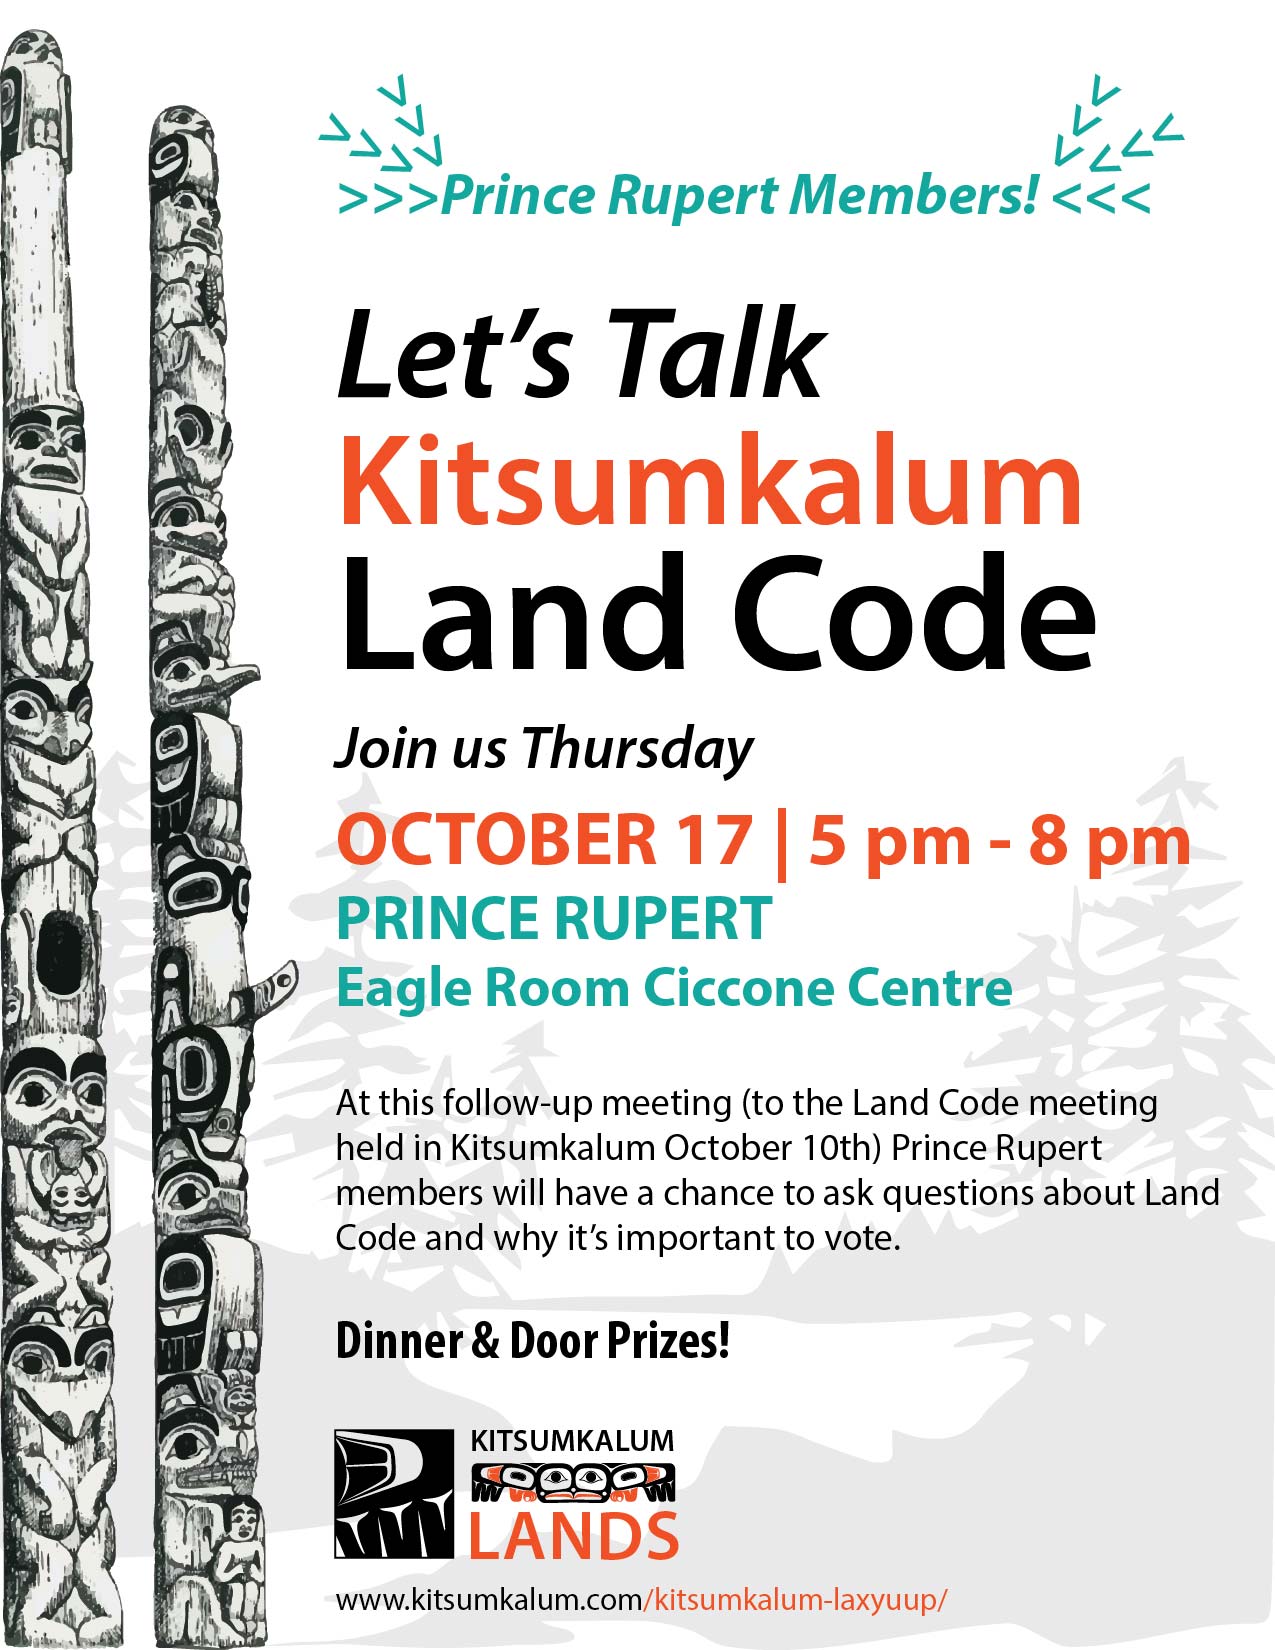 Let’s Talk About Land Code PRINCE RUPERT Oct 17